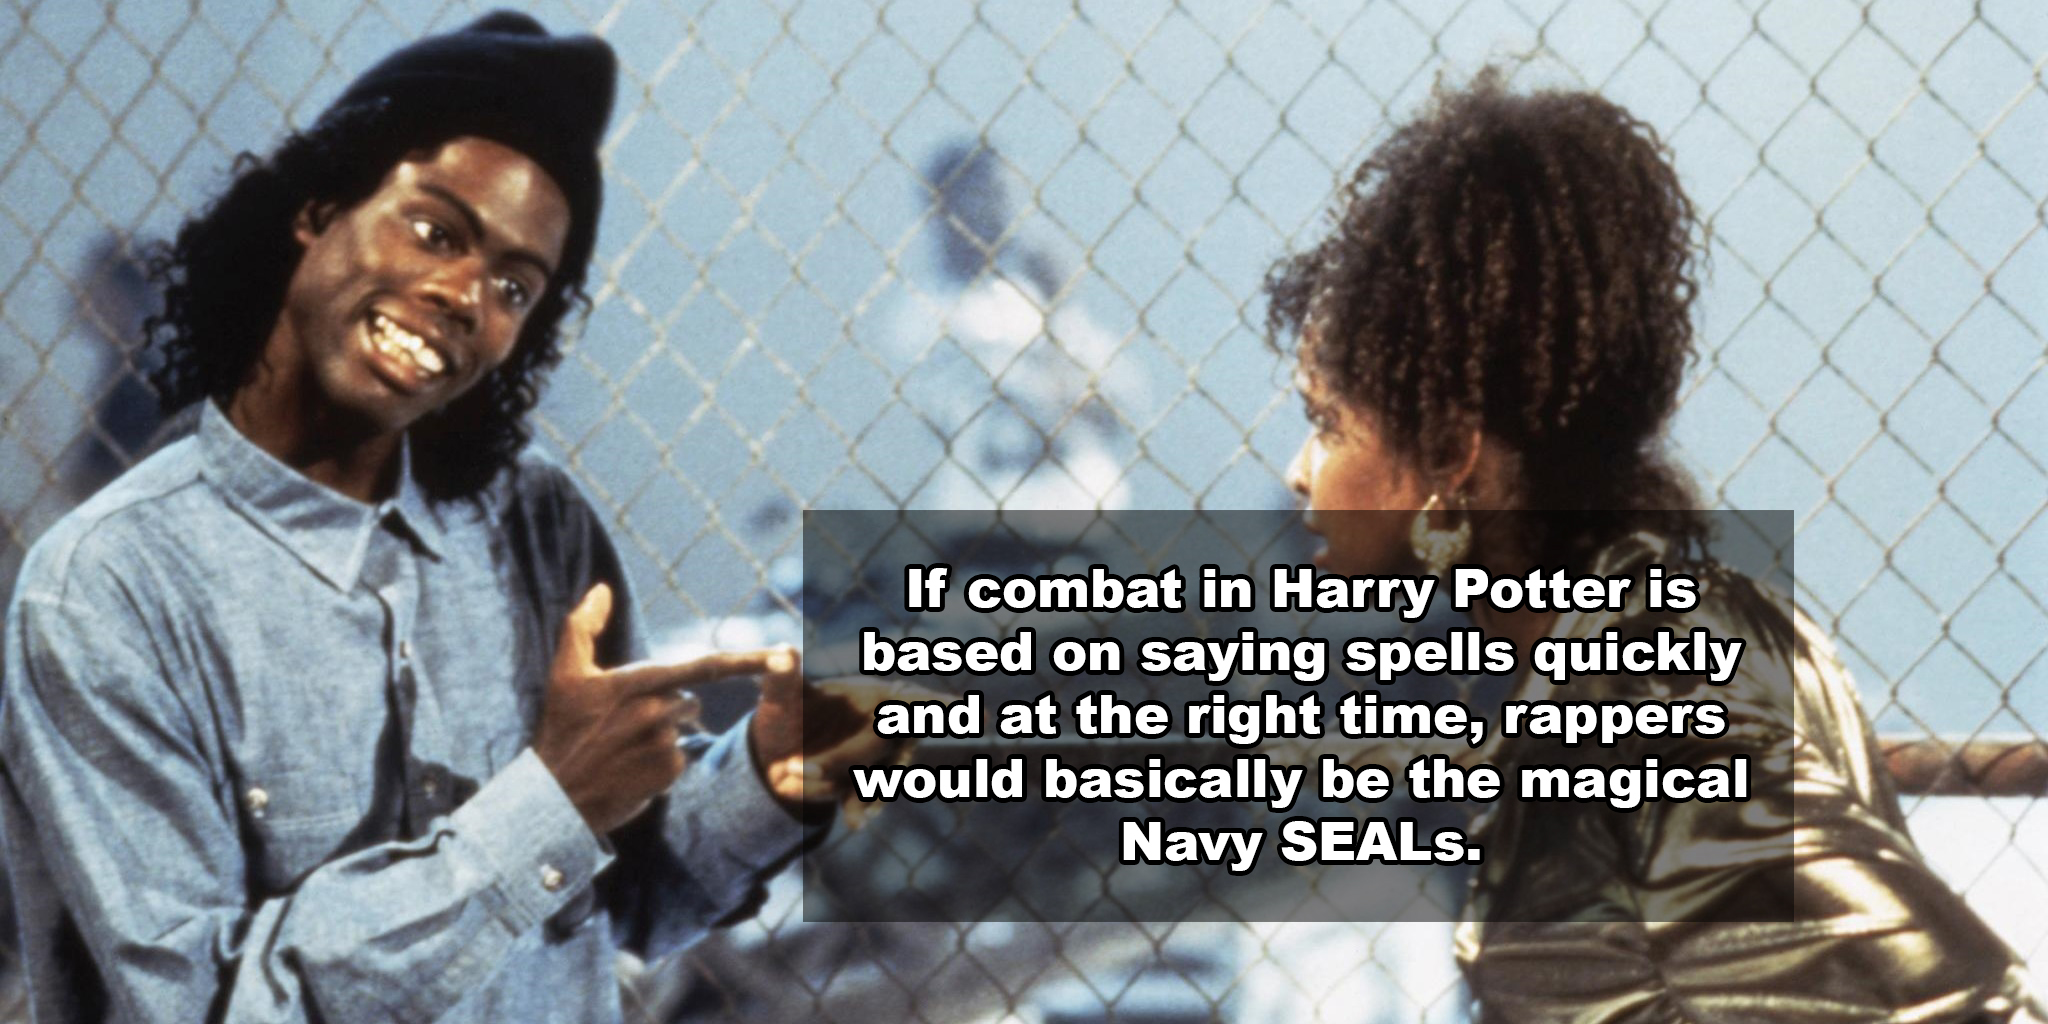 human behavior - If combat in Harry Potter is based on saying spells quickly and at the right time, rappers would basically be the magical Navy SEALs.